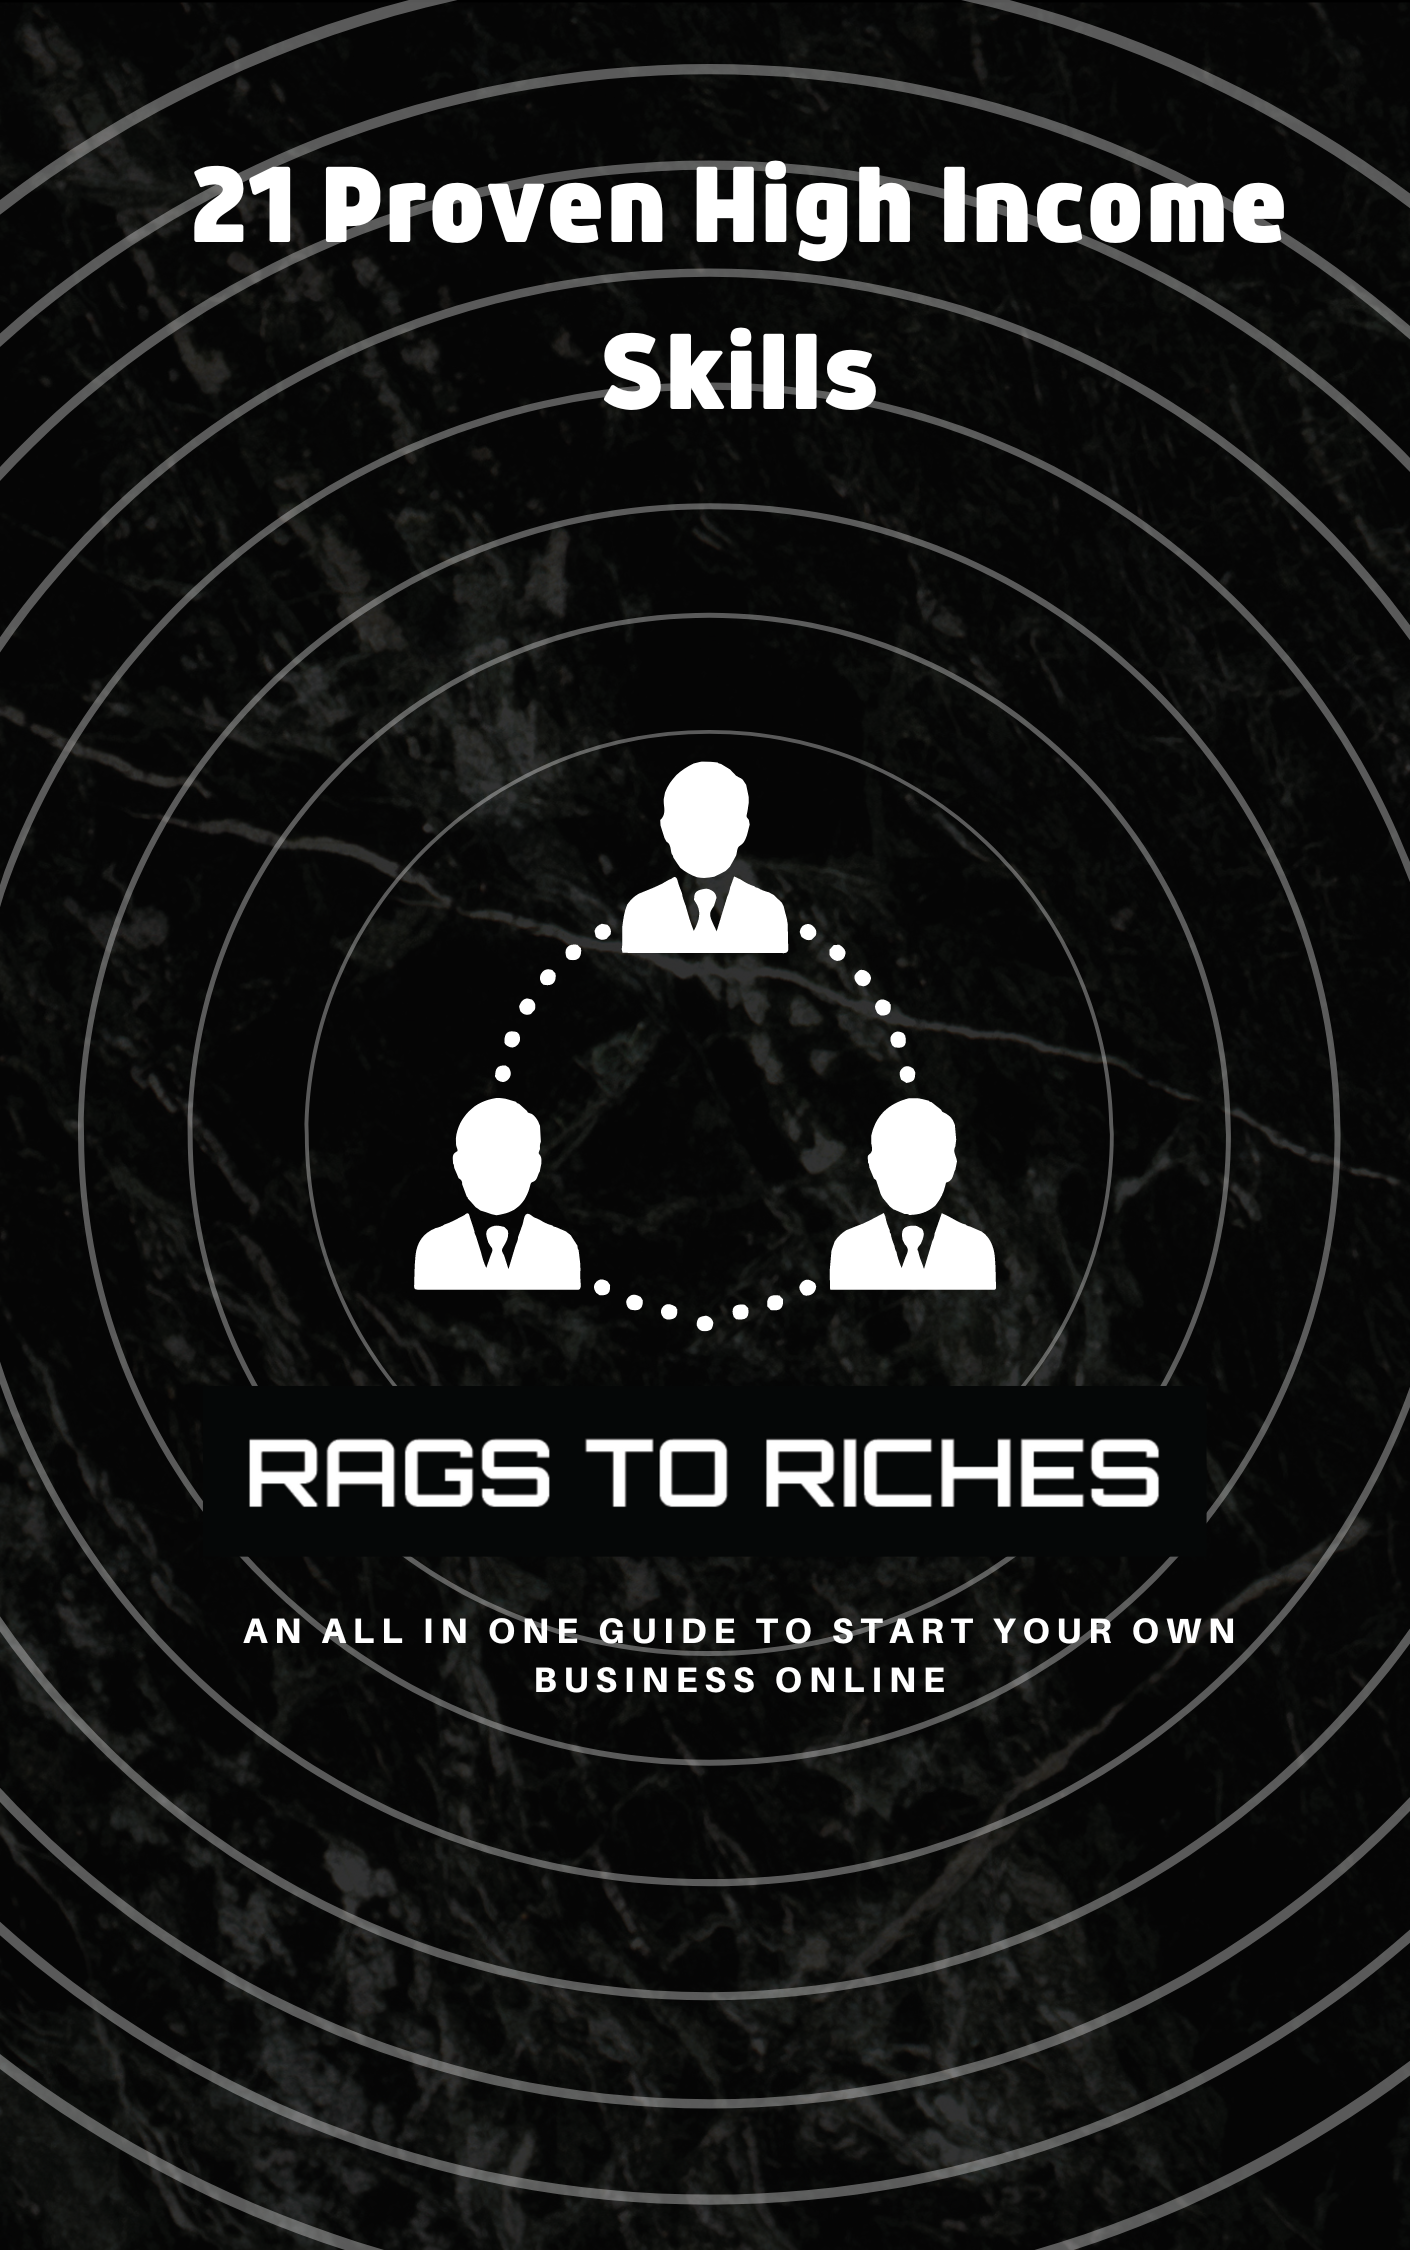 Rags to RICHES: Learn & Develop High Income Skills Today!